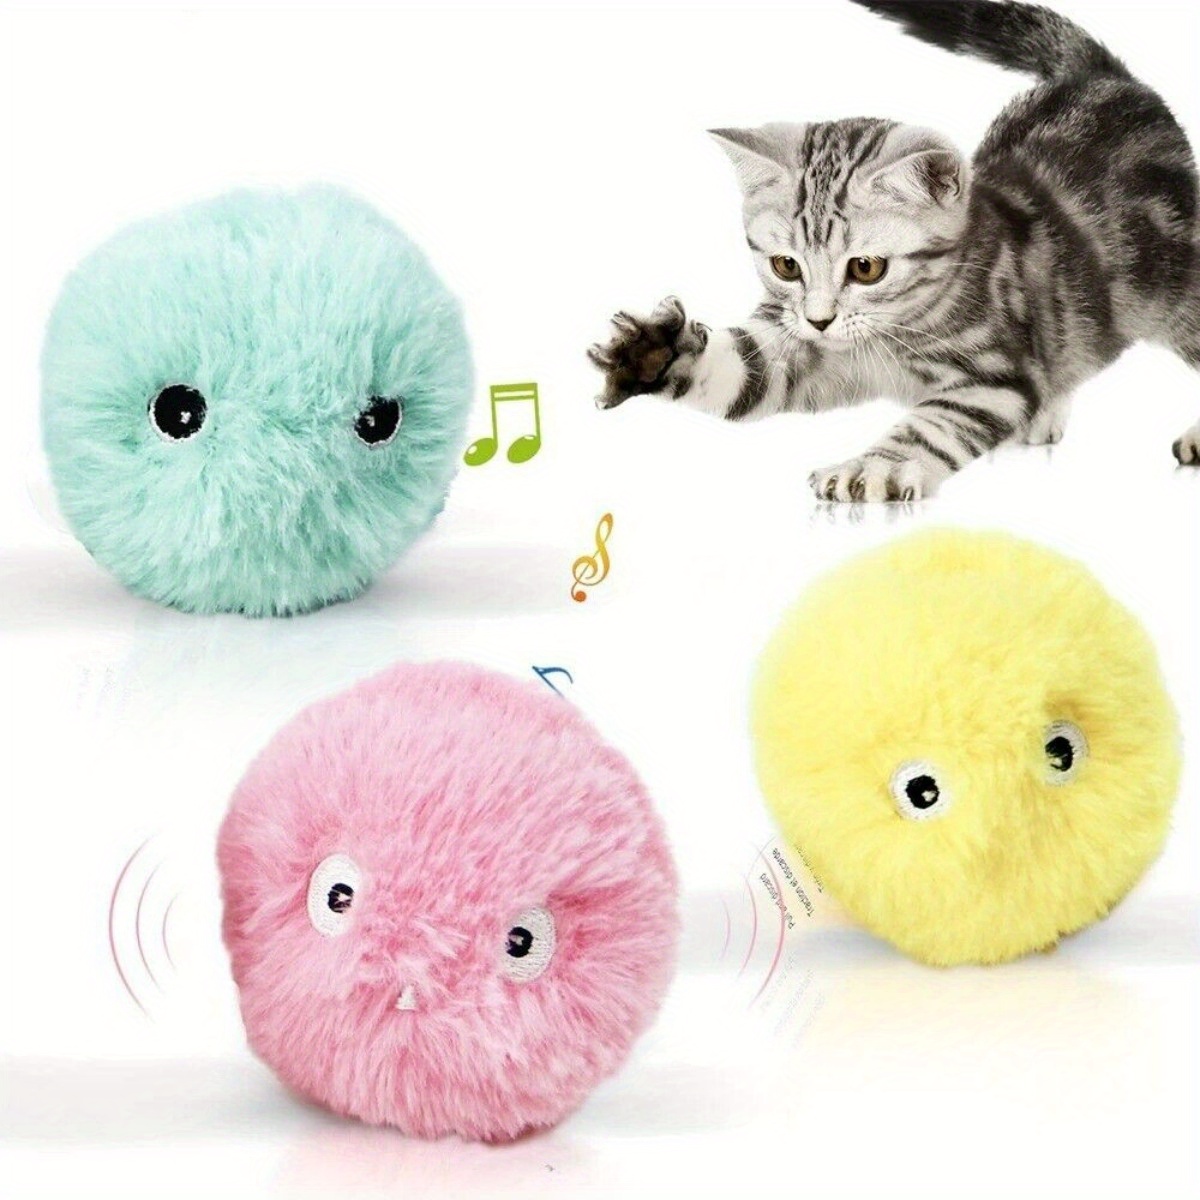 

3pcs Chirping Balls Interactive Cat Plush Eva Toy Ball - Squeaky Sound Training Toy For Cats - Fun Pet Toy Ball For Playtime And Exercise, Blue, Yellow, Pink